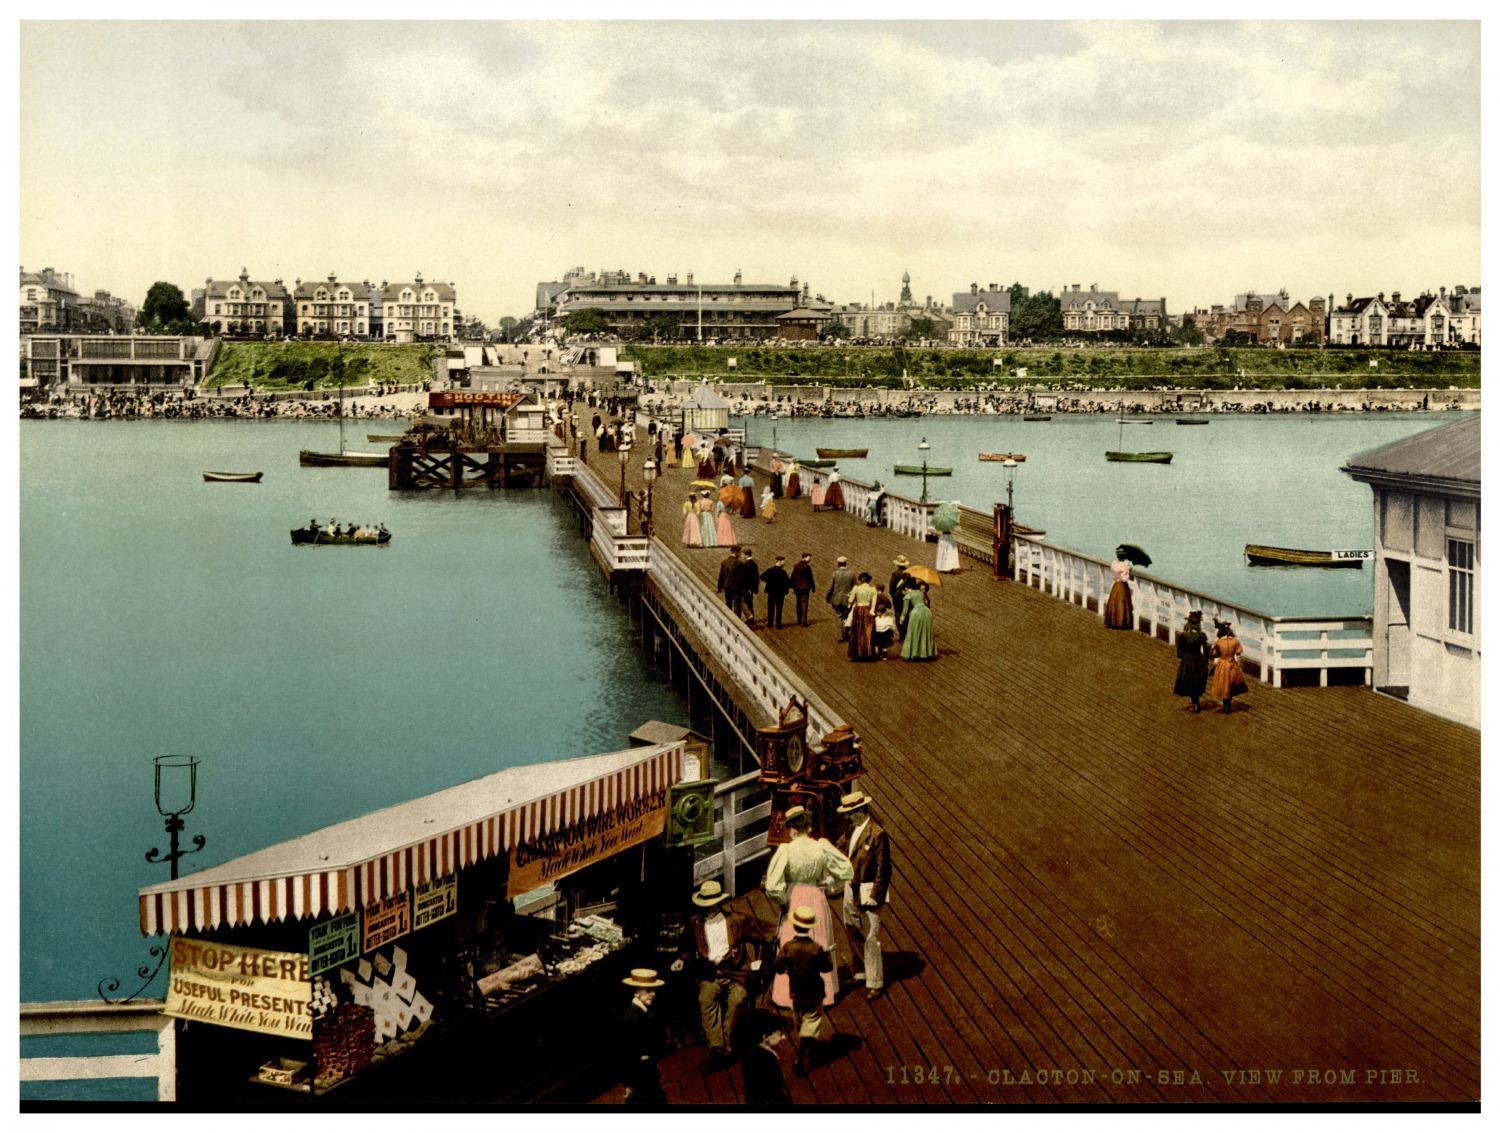 Clacton-on-Sea. View from Pier. Vintage photochrome by P.Z, photochrome Zurich p